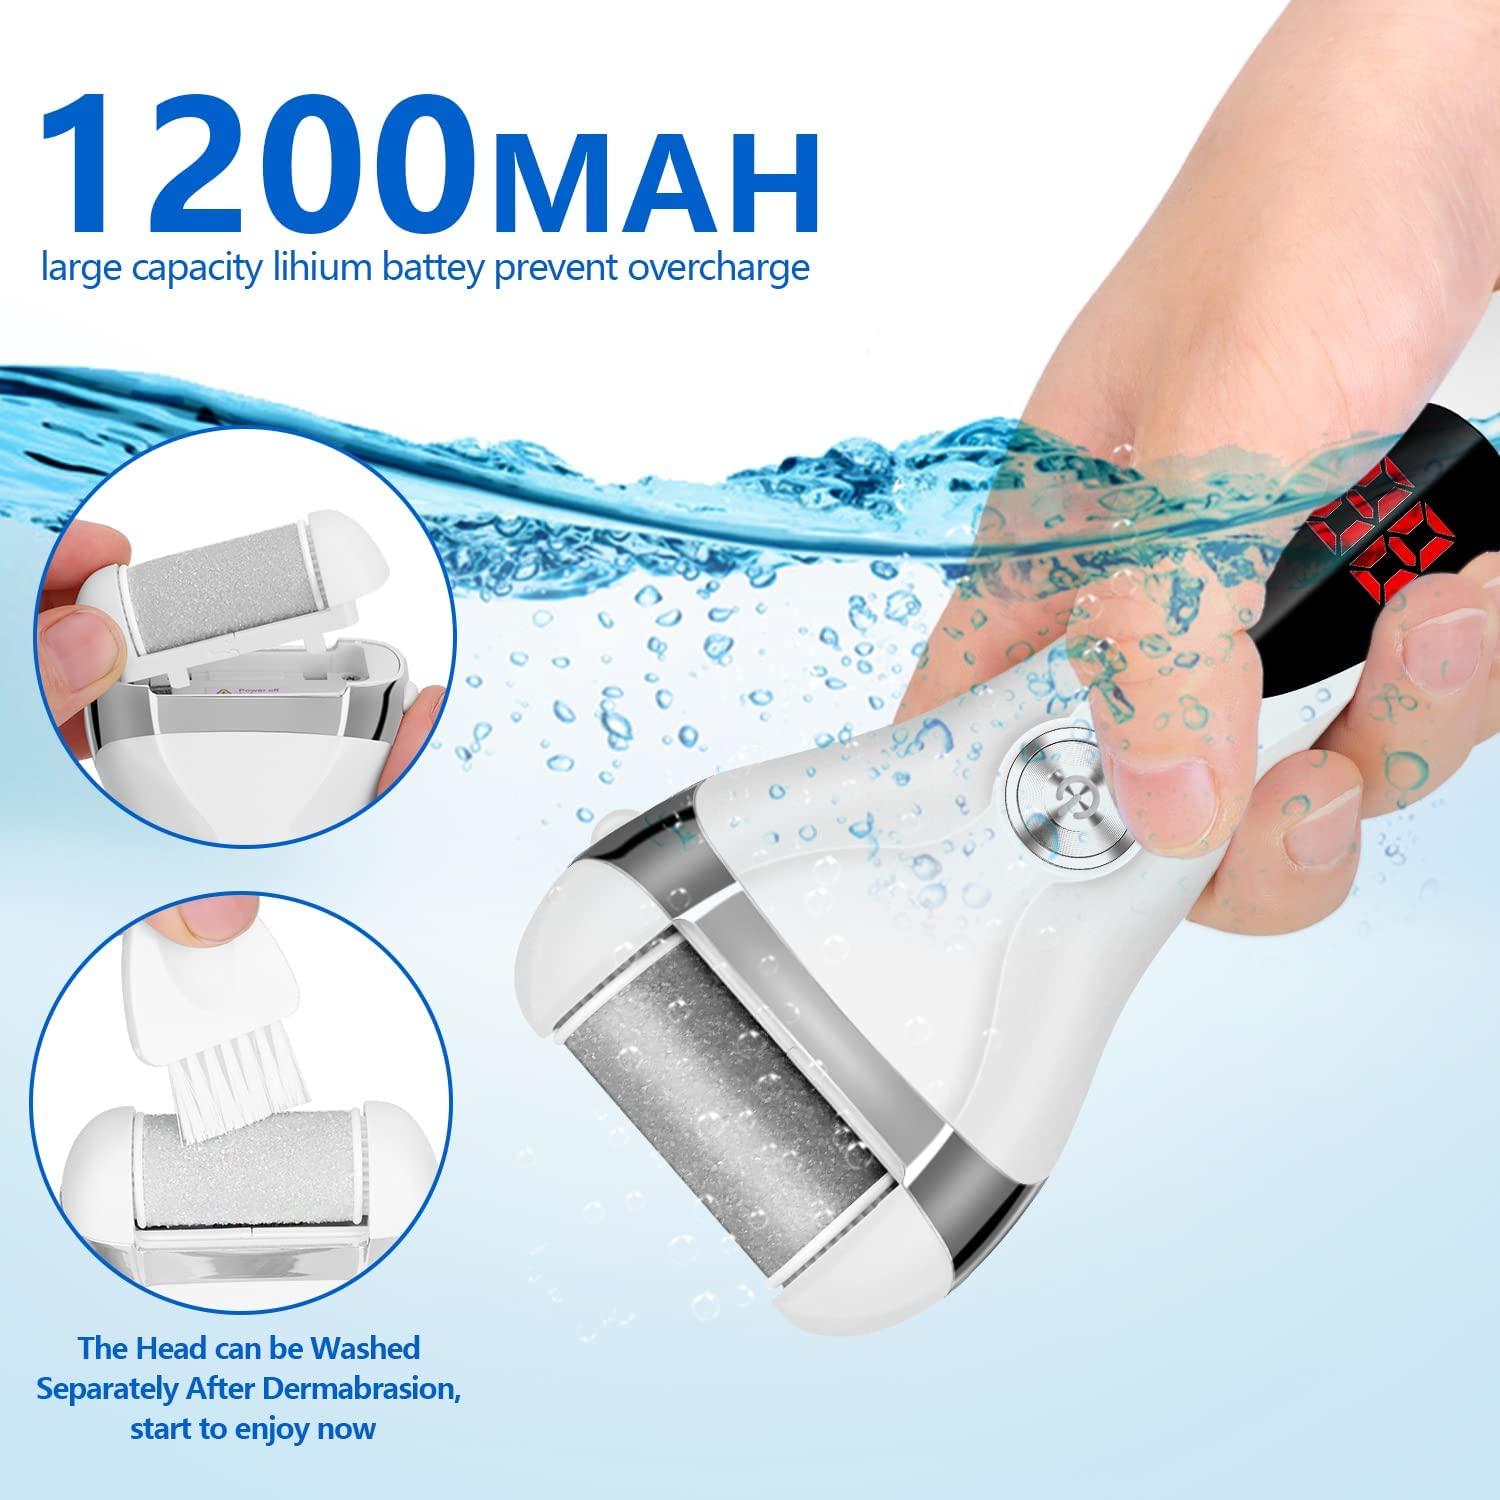 Electric Foot Grinder with Roller Head Battery Powered Portable Feet File Pedicure Tool Foot Scrubber Callus Remover for Dead Hard Cracked Dry Skin